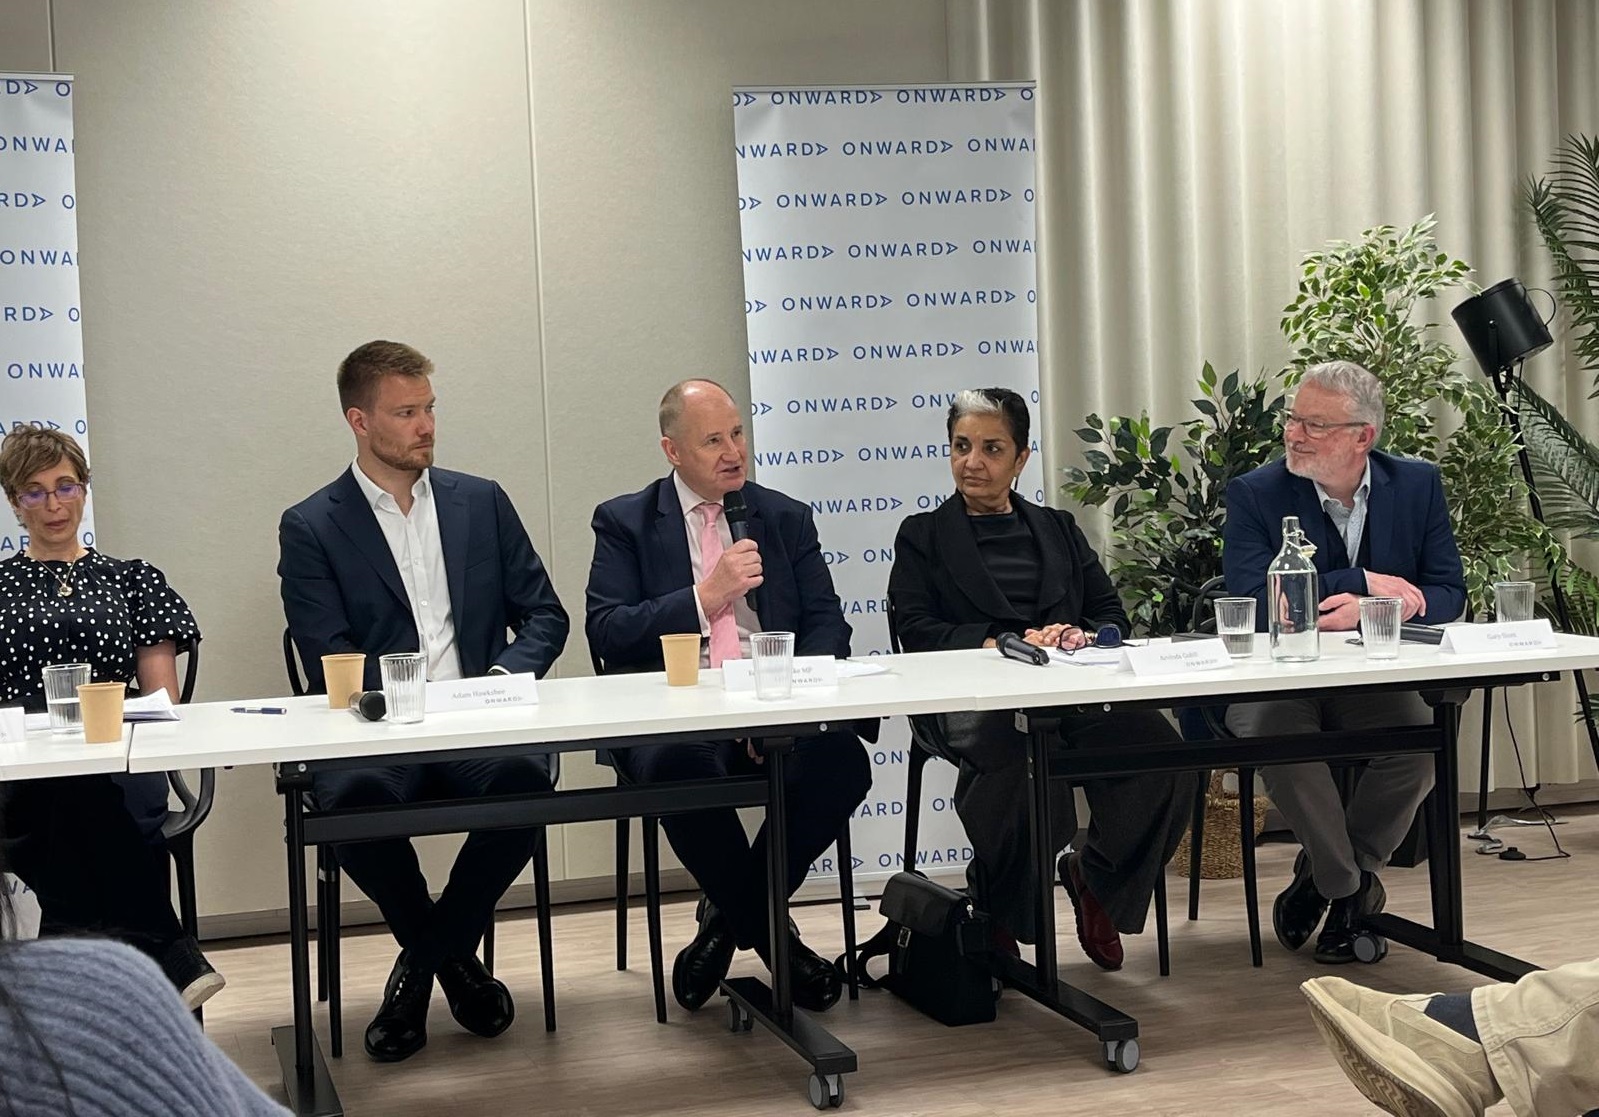 the event panel, from left to right Poppy Simister-Thomas, Victoria Papworth, Adam Hawksbee, Kevin Hollinrake MP, Arvinda Gohil and Gary Stott